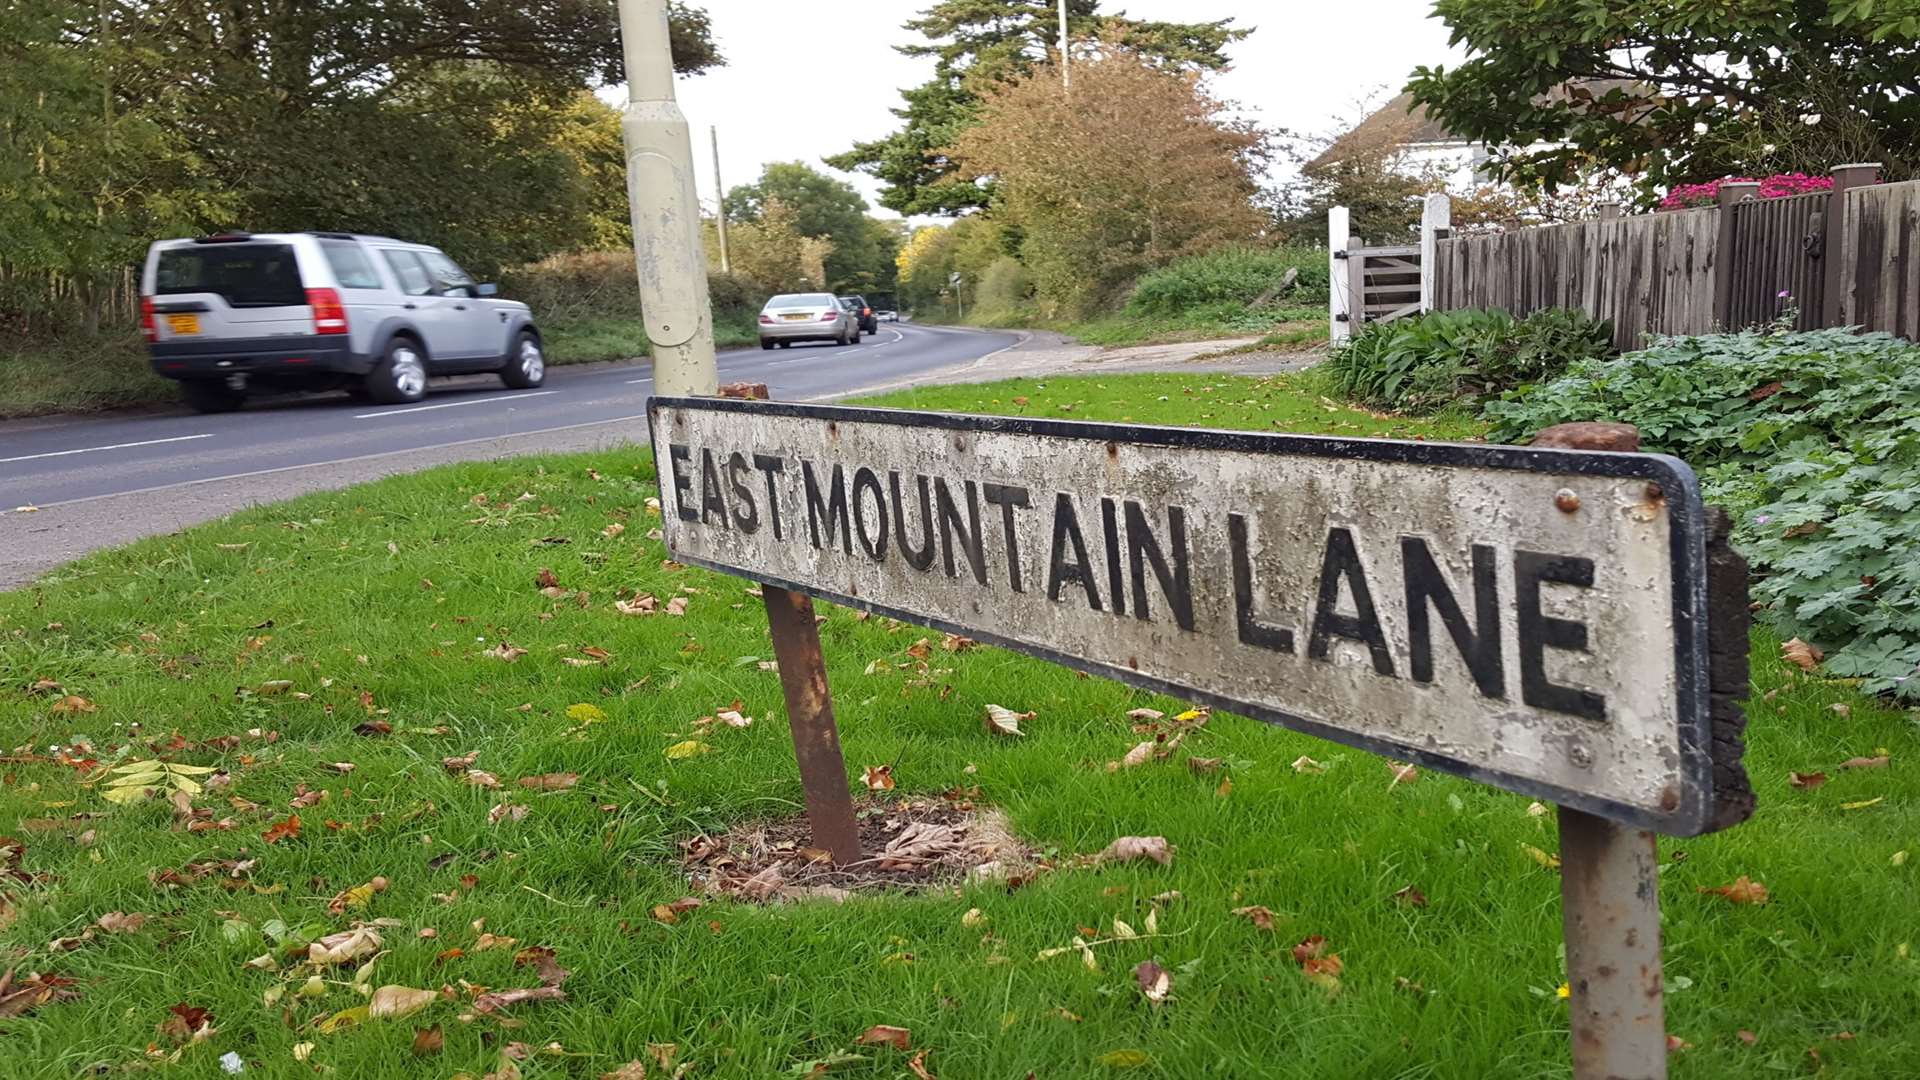 625 homes are proposed off East Mountain Lane